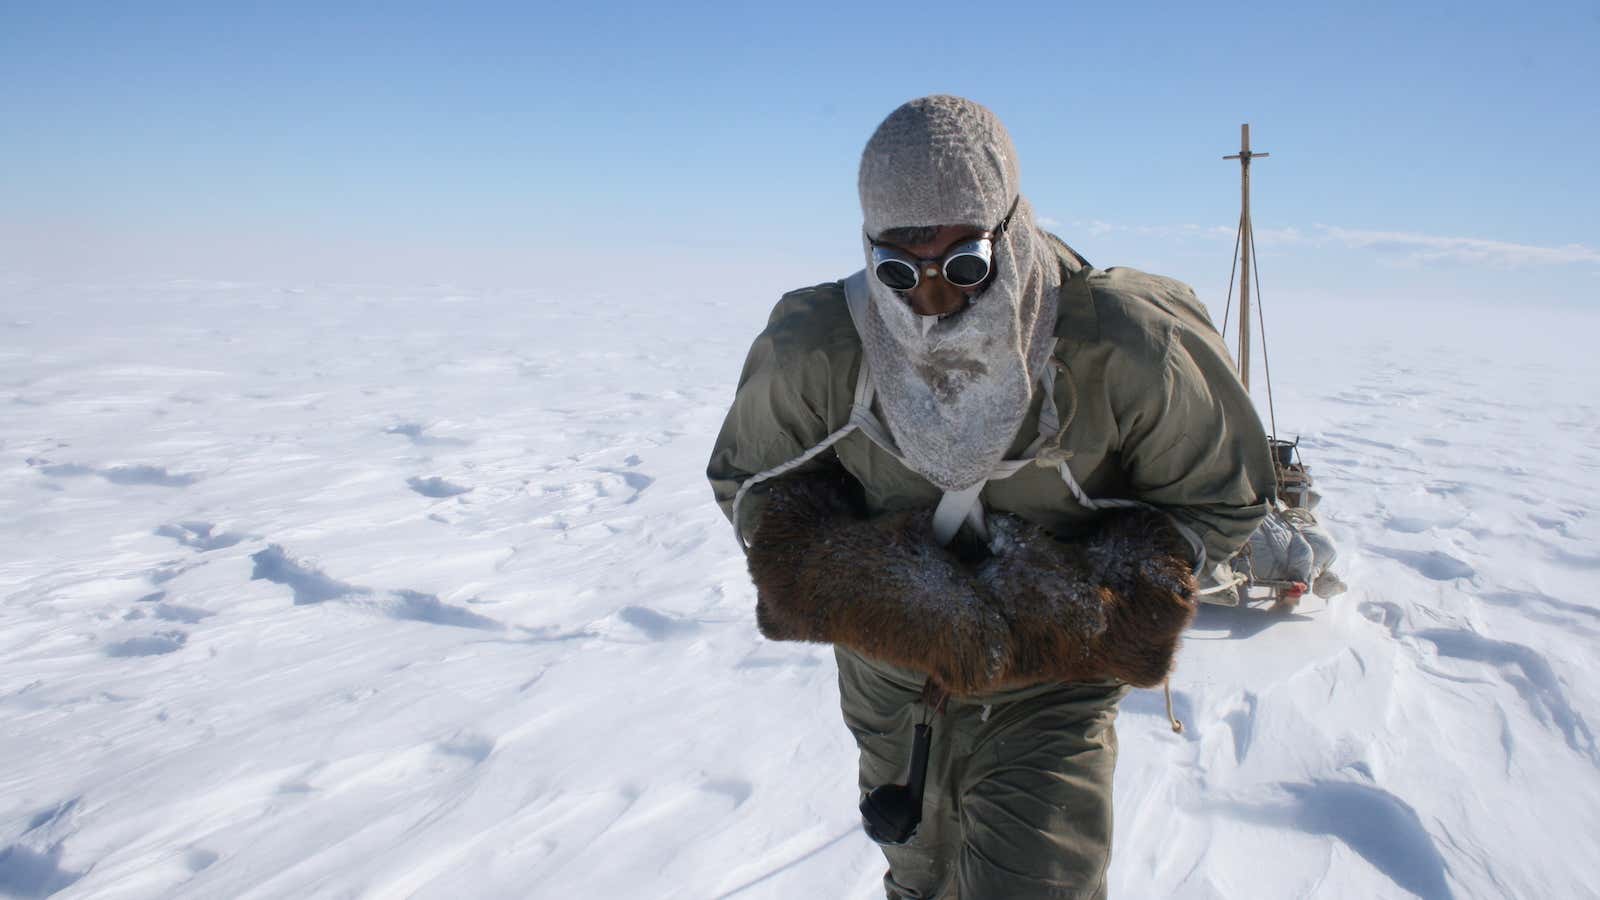 What braving very cold environments can teach us about fixing our rapidly warming world.